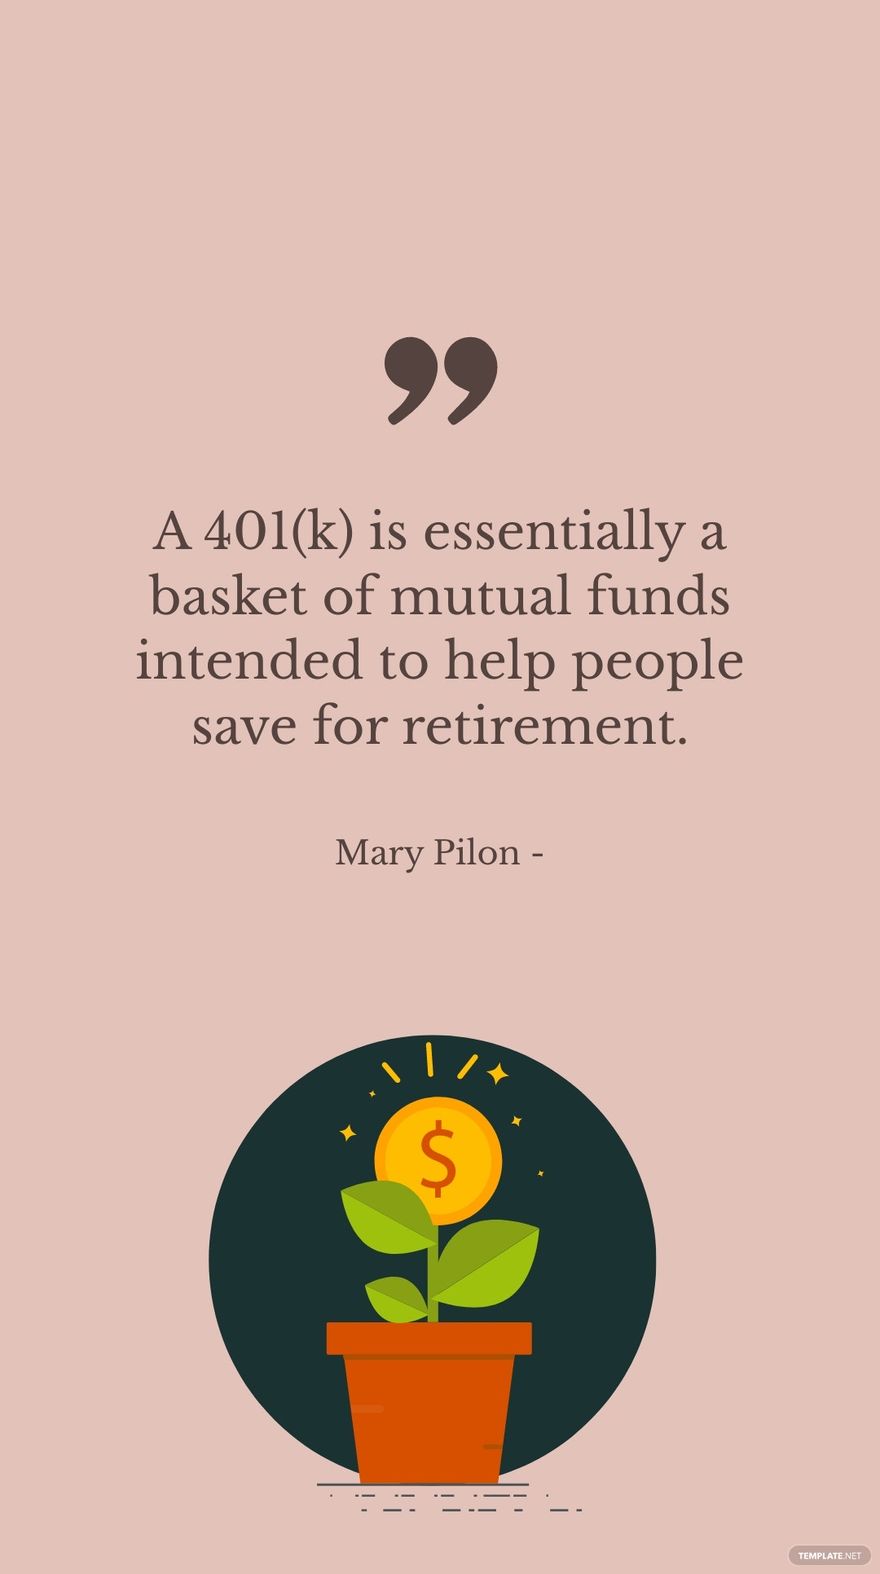 Free Mary Pilon - A 401(k) is essentially a basket of mutual funds intended to help people save for retirement. in JPG